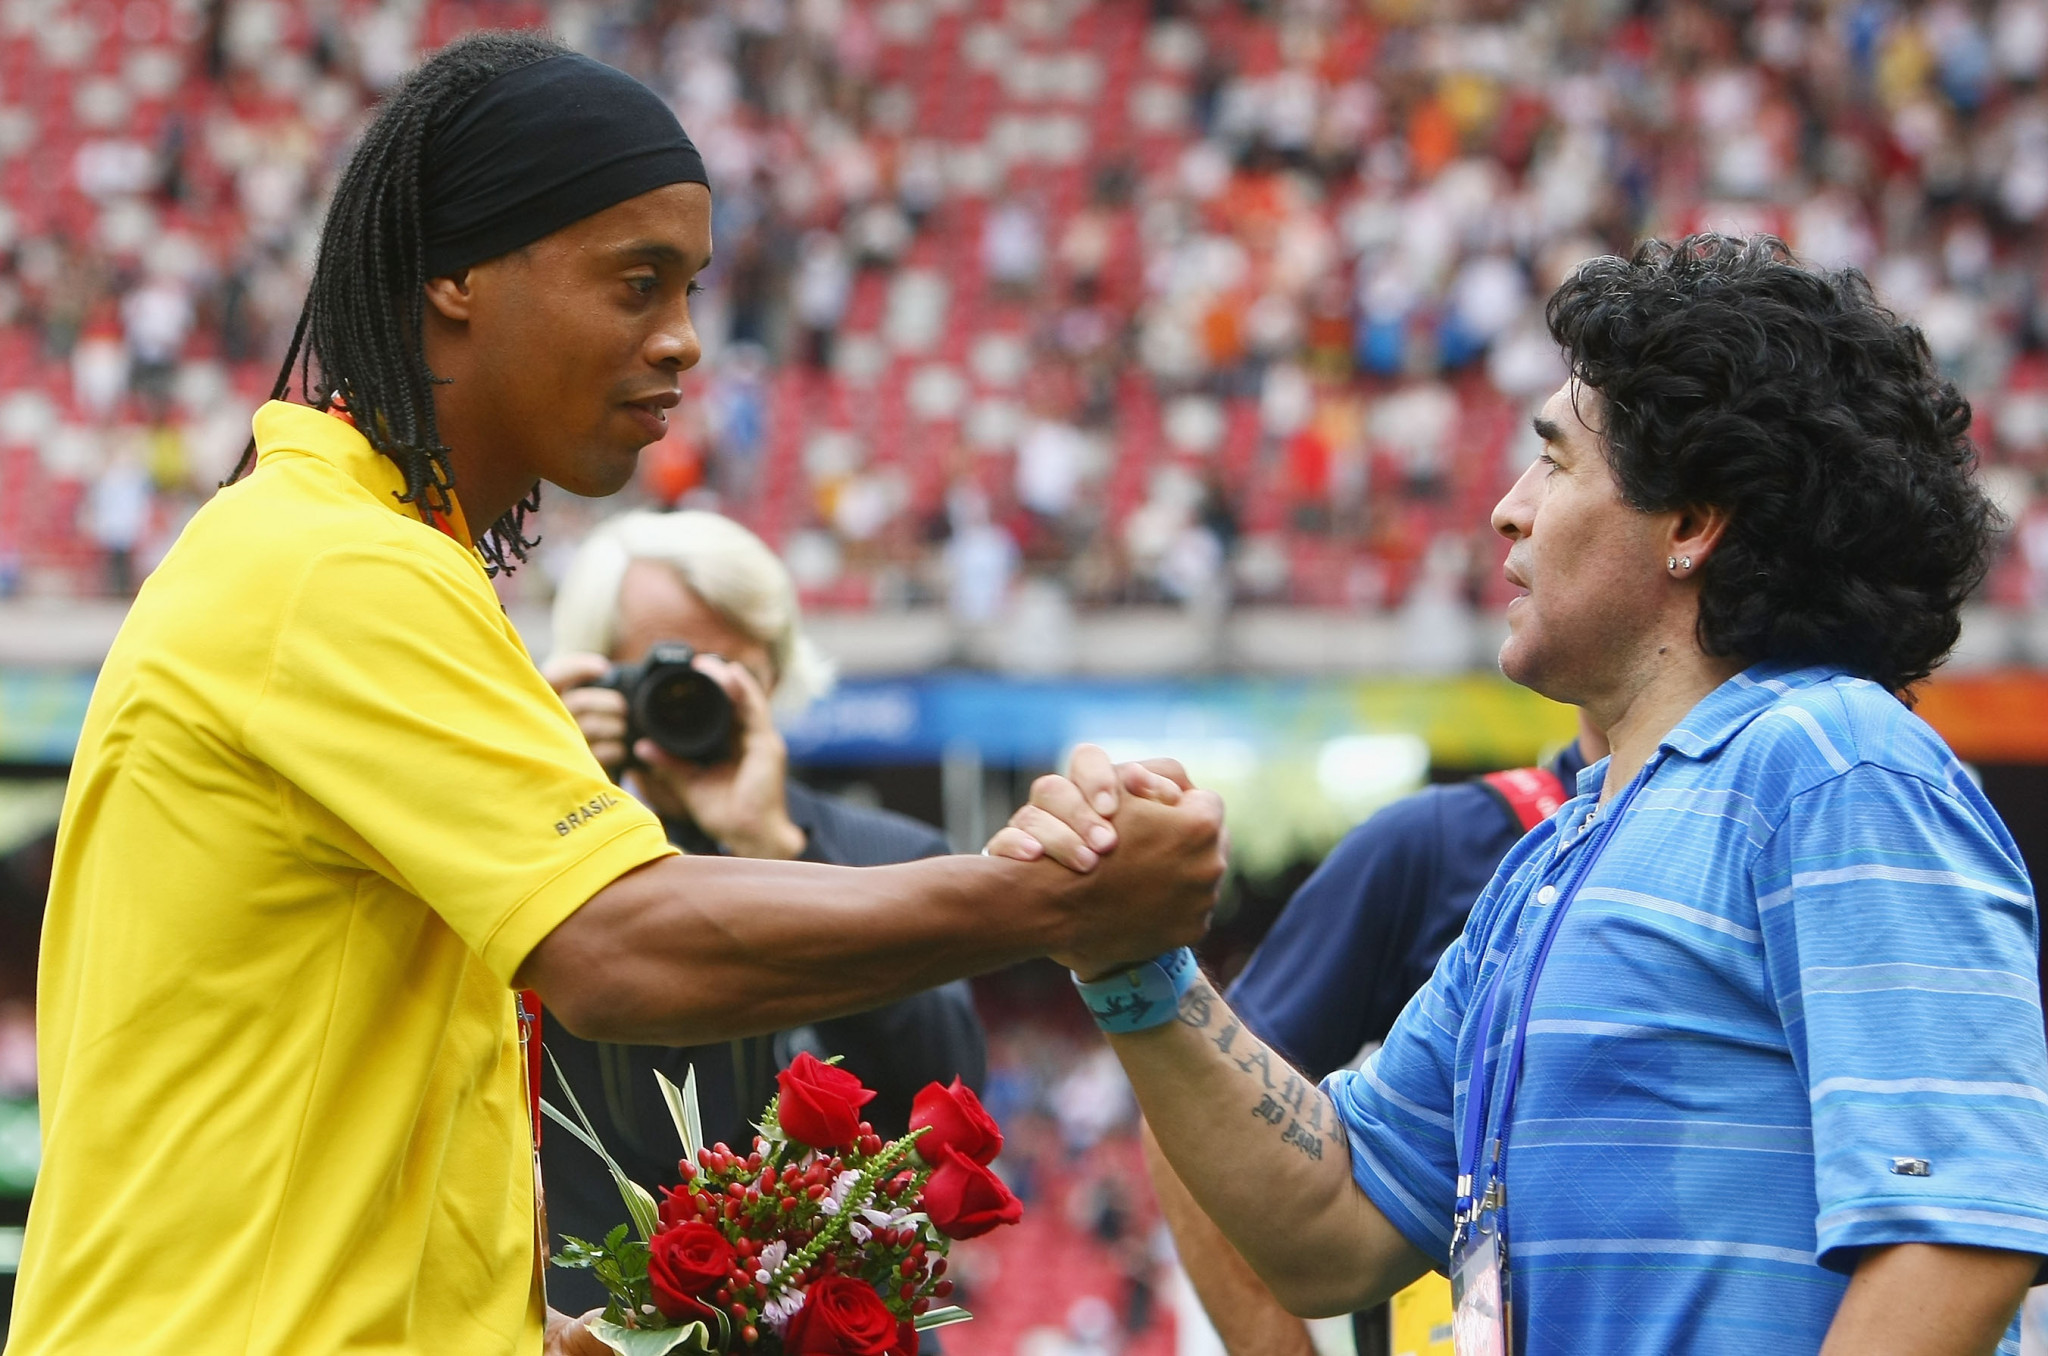 Ronaldinho was an overage player at Beijing 2008 as Diego Maradona cheered Argentina to victory ©Getty Images